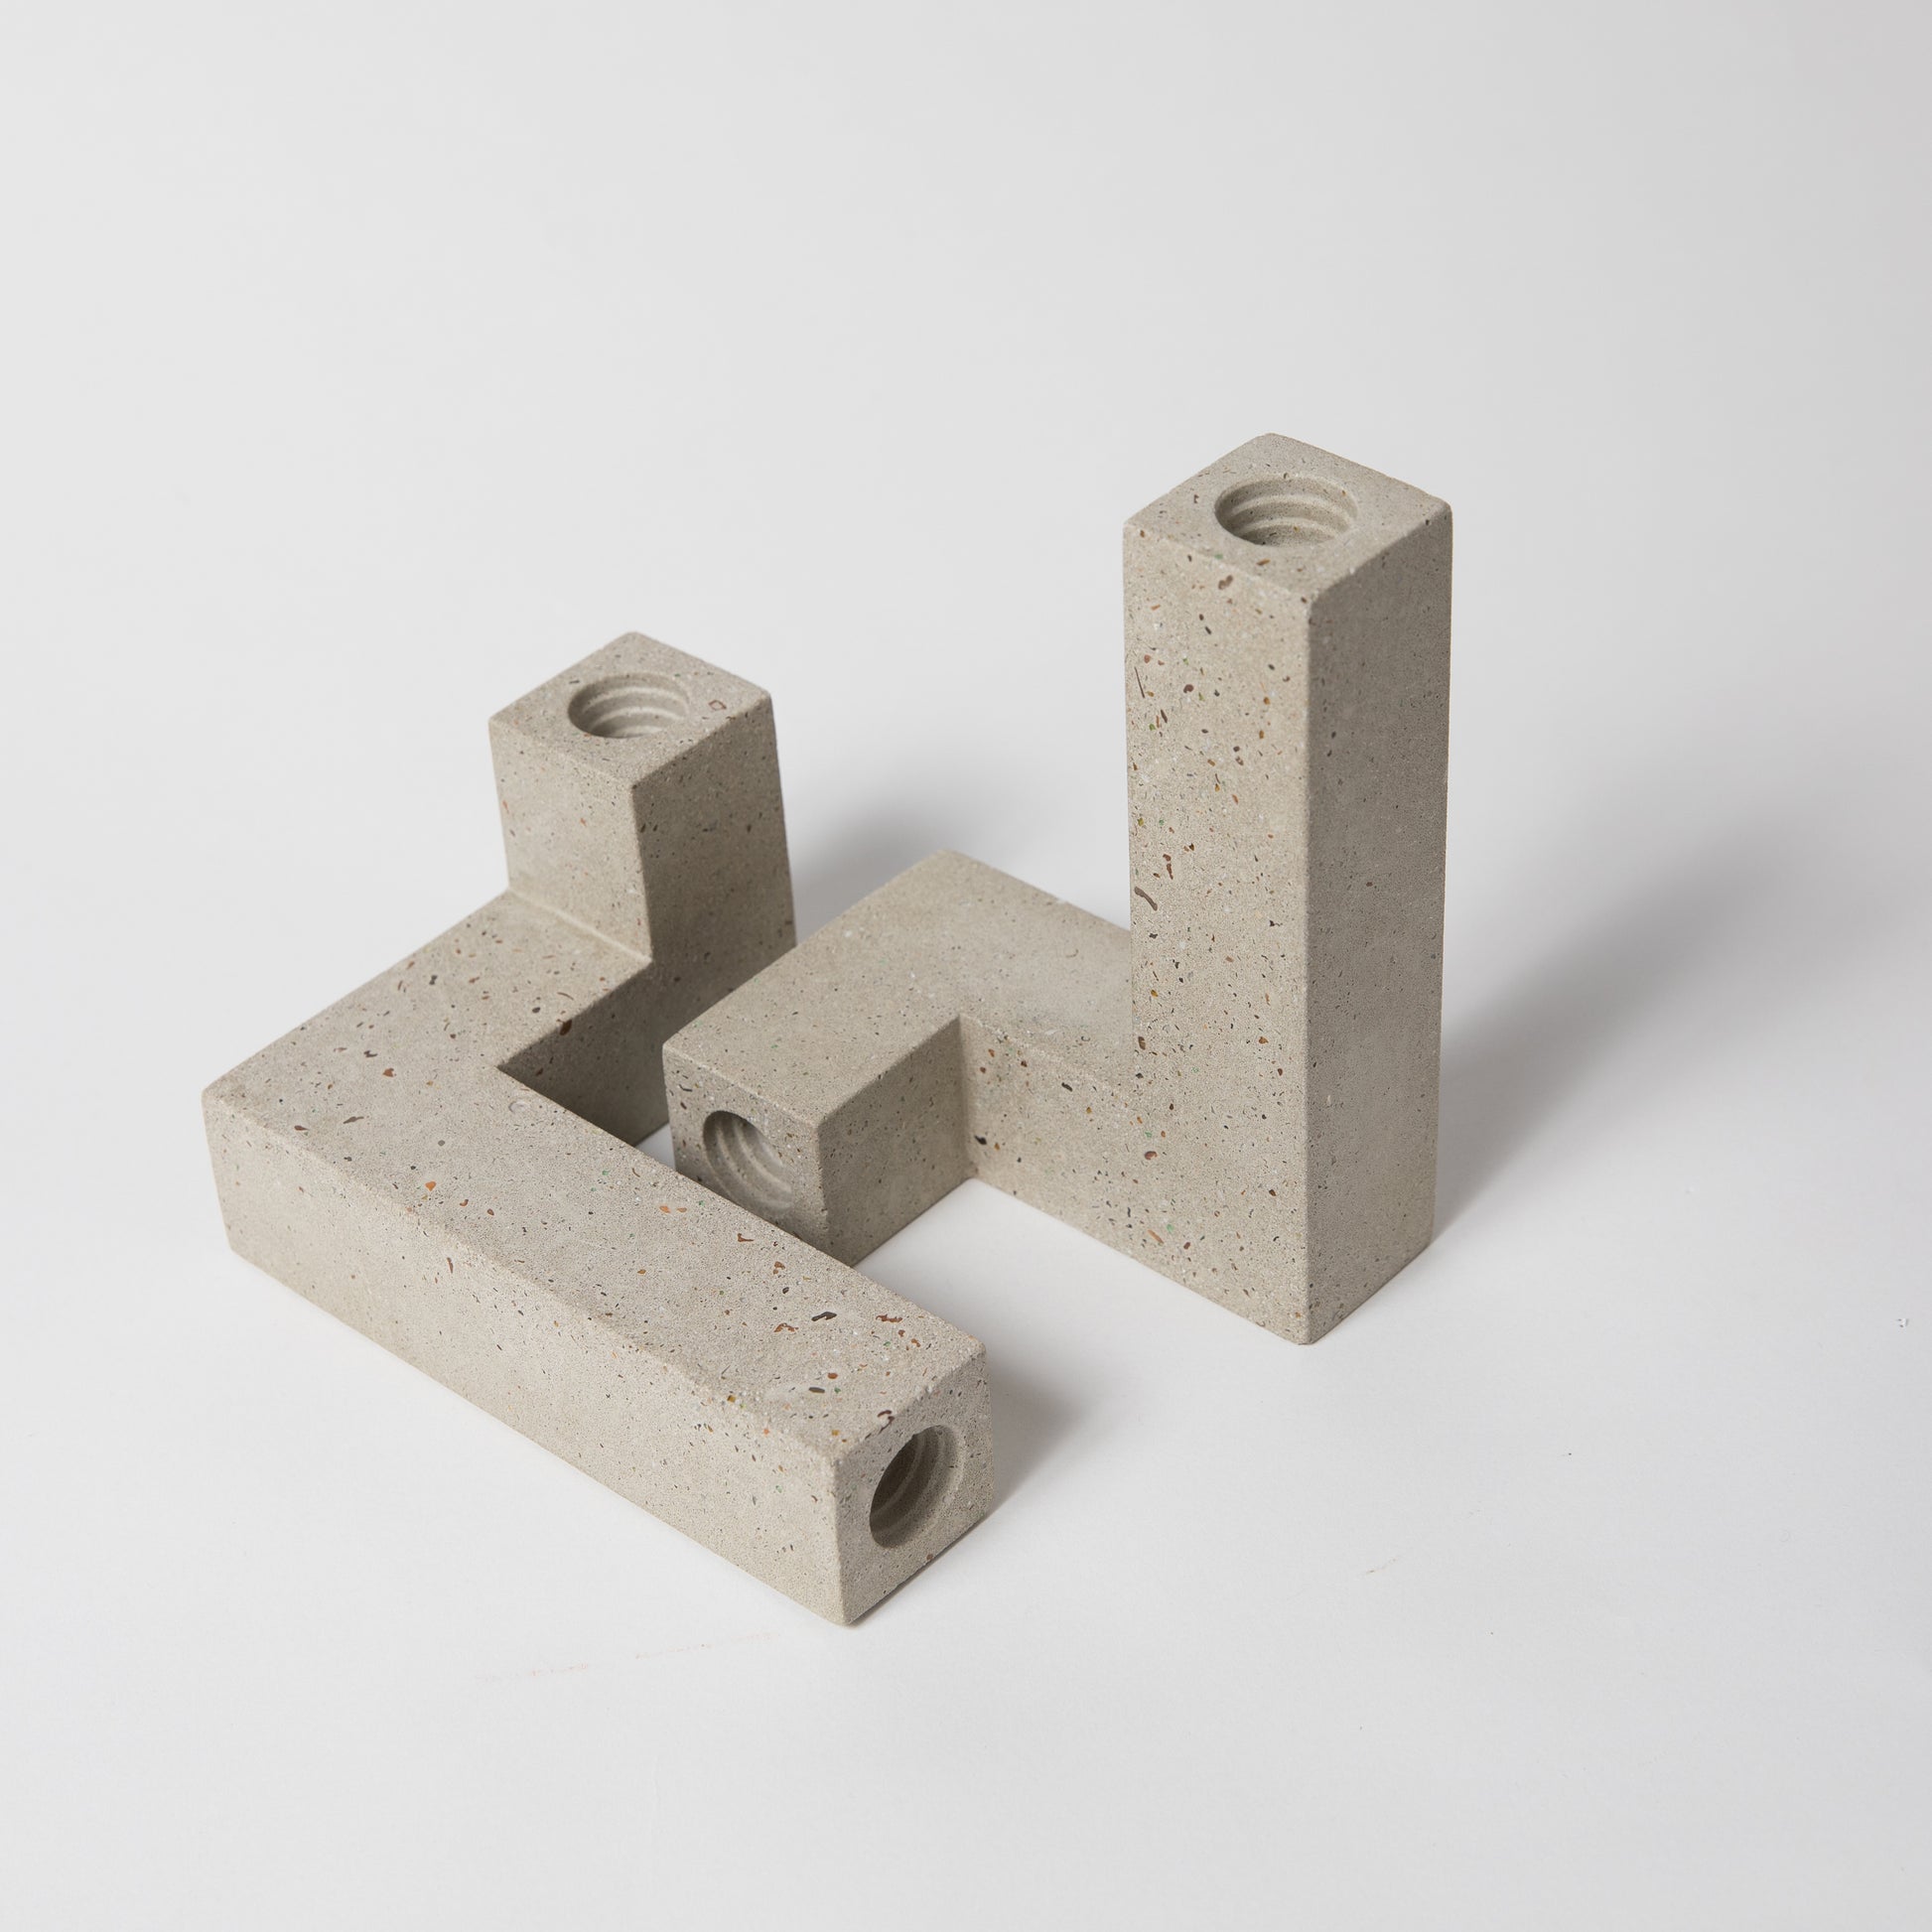 Concrete candlestick holder, set of 2 in natural terrazzo.